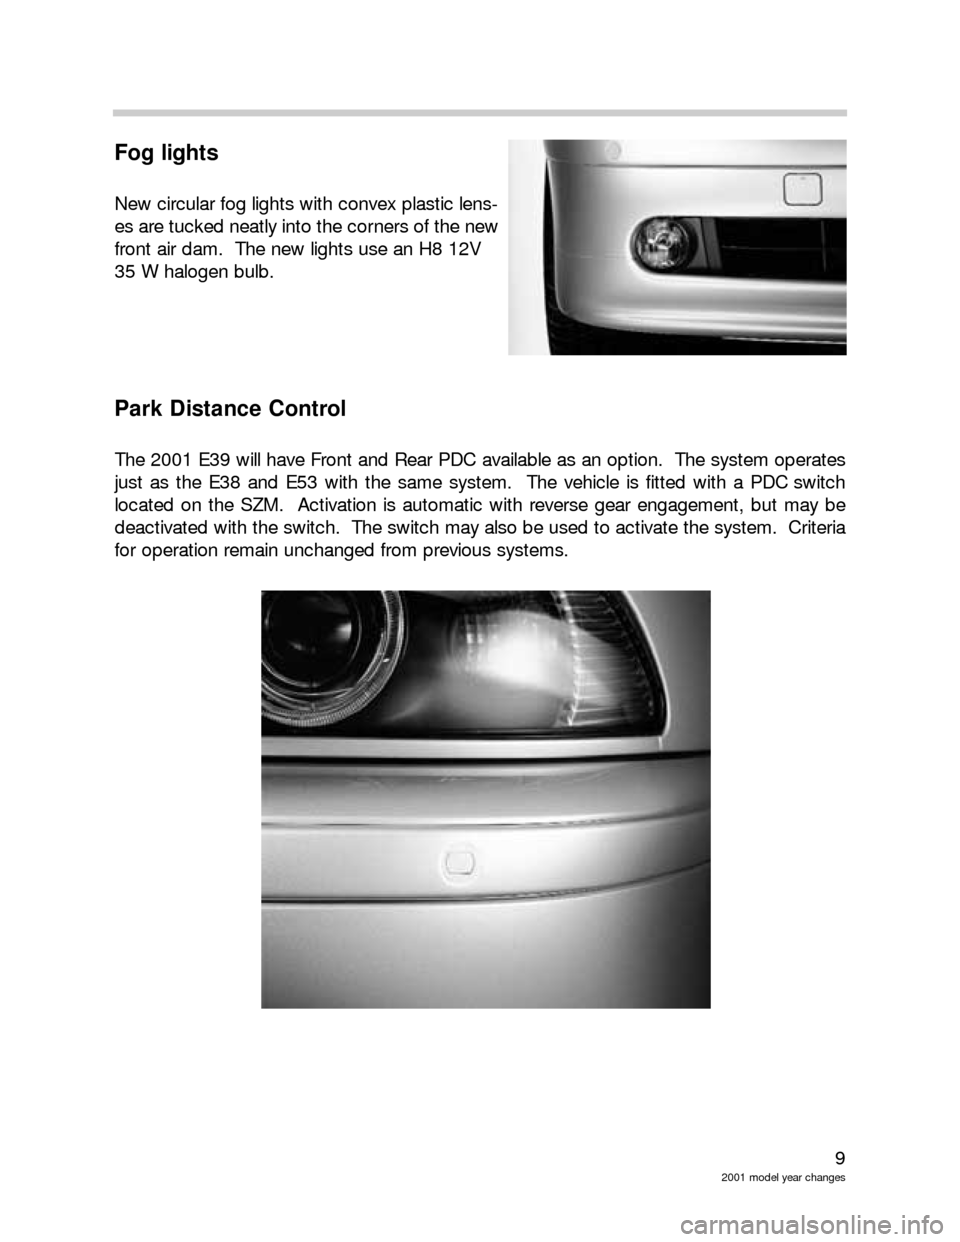 BMW 3 SERIES 2004 E46 Model Yar Changes 9
2001 model year changes
Fog lights
New circular fog lights with convex plastic lens-
es are tucked neatly into the corners of the new
front air dam.  The new lights use an H8 12V 
35 W halogen bulb.